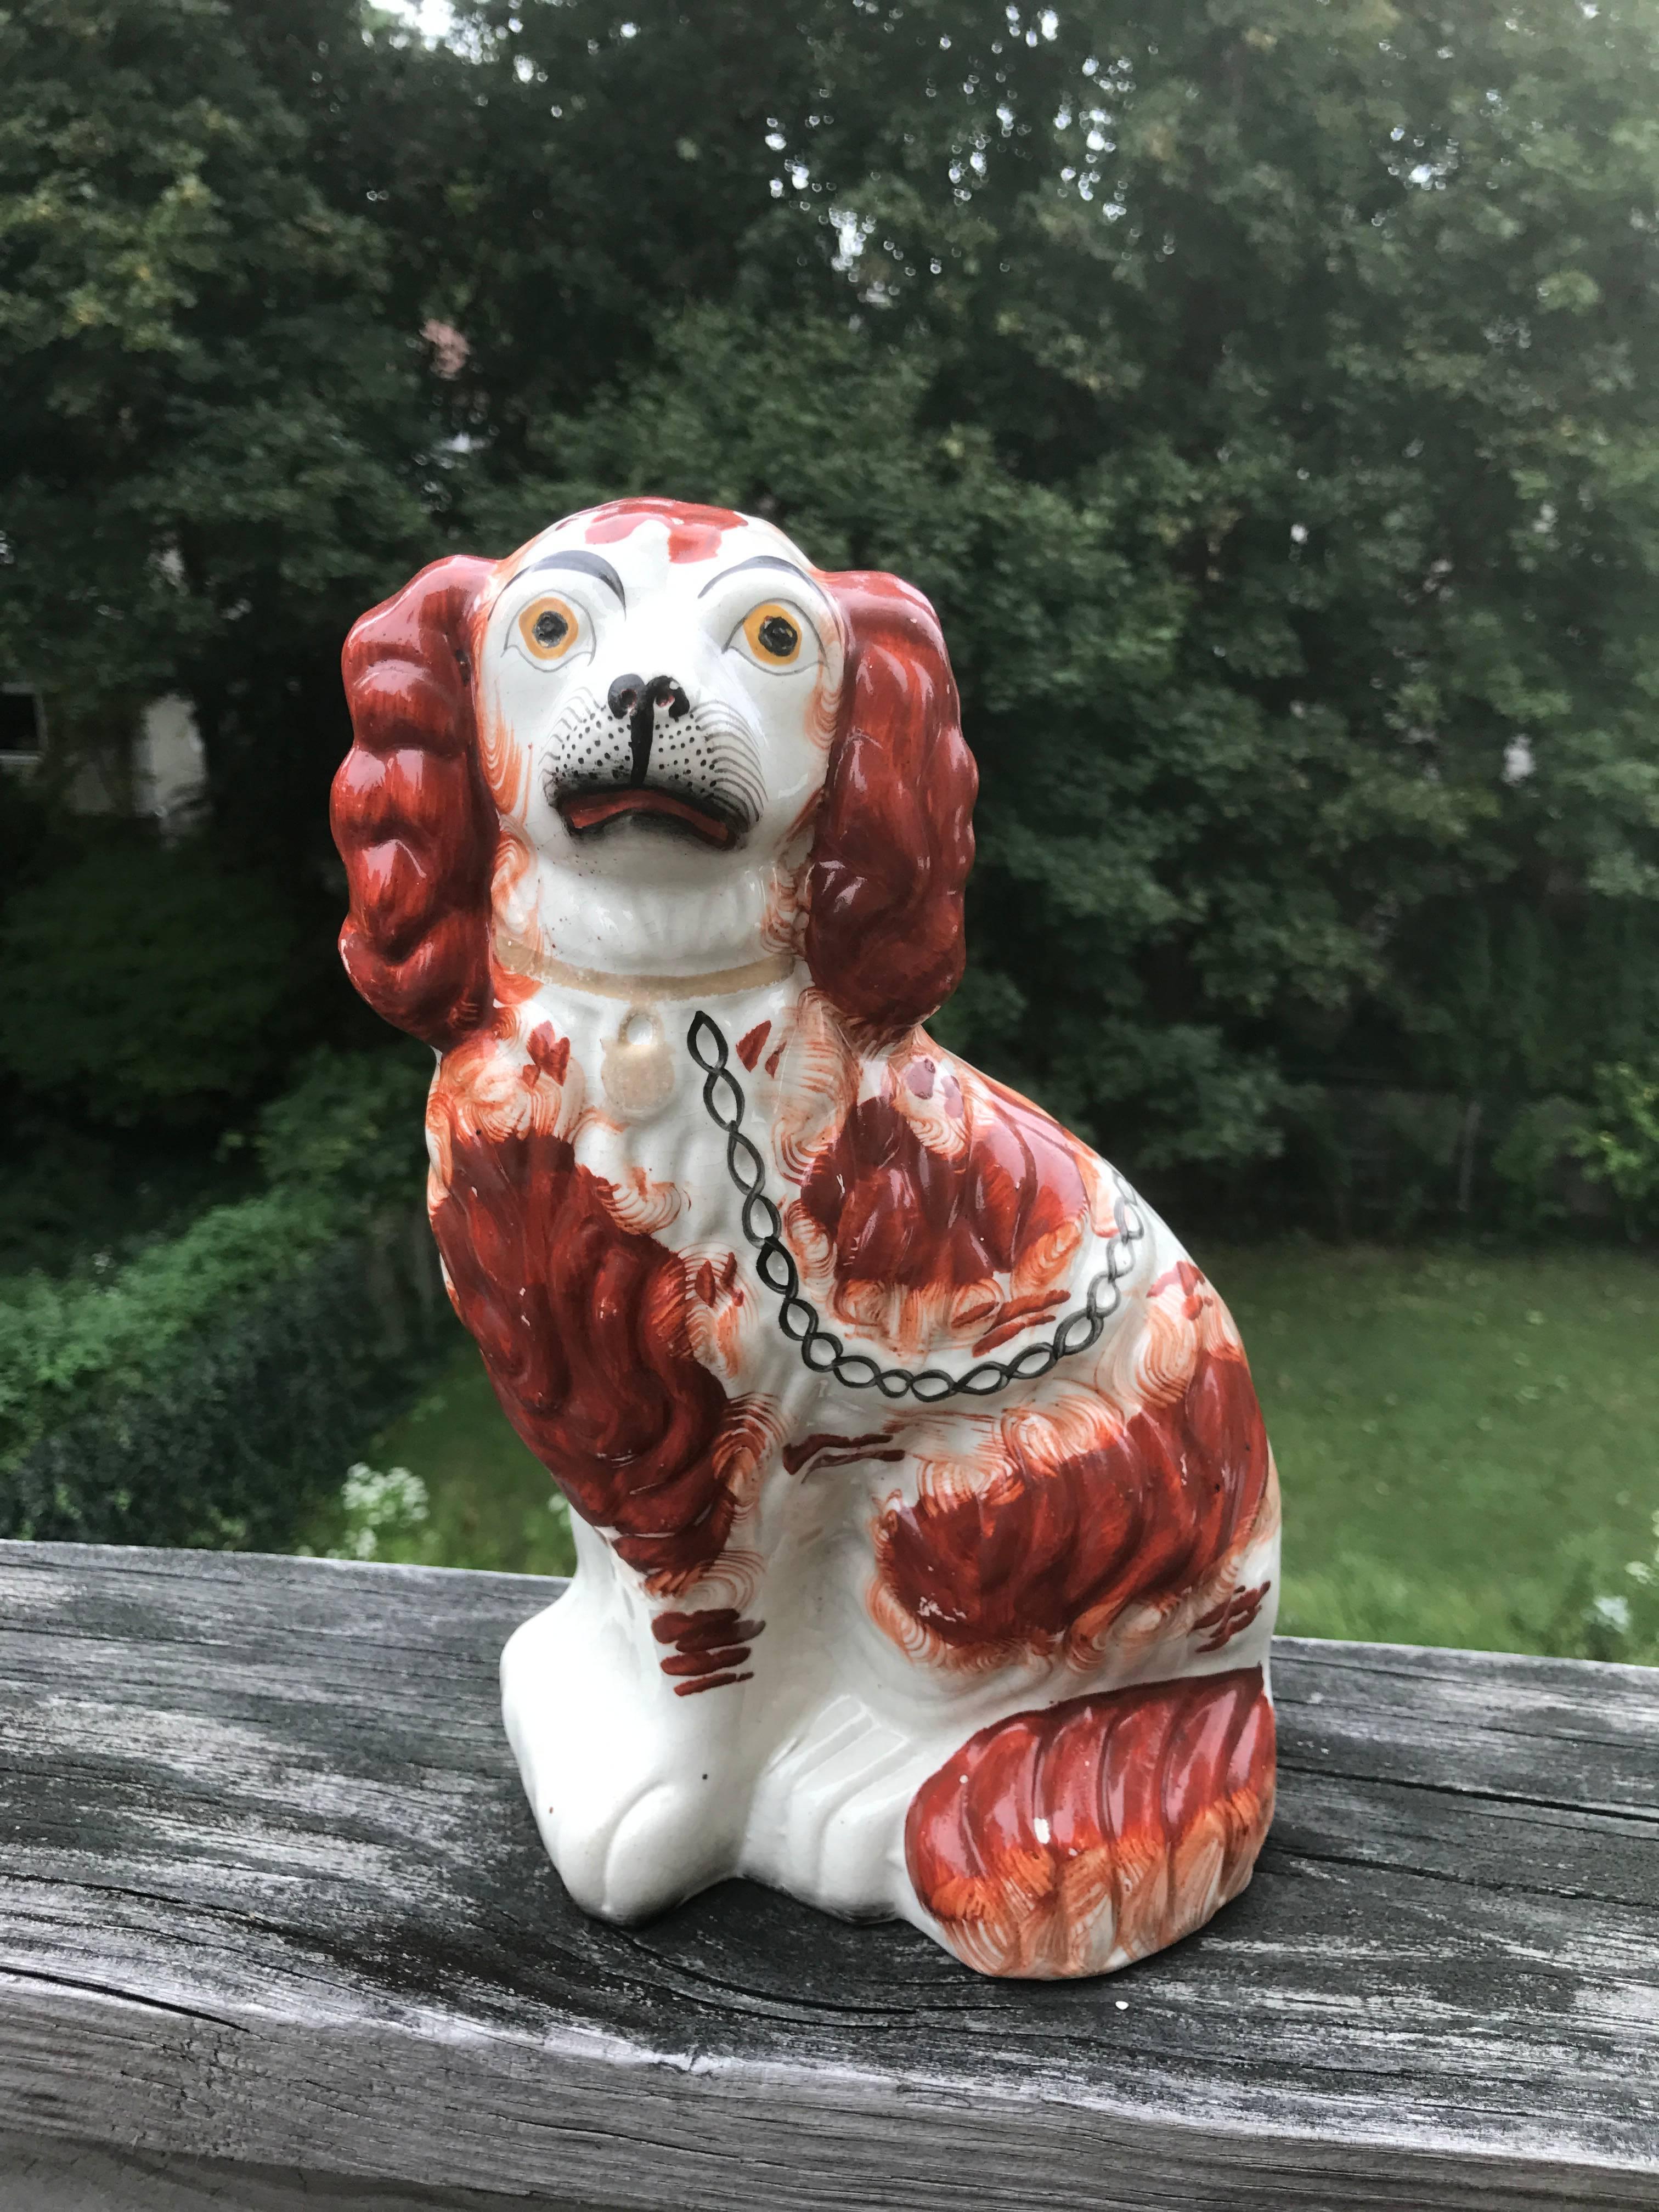 Fine pair of English Victorian Staffordshire porcelain spaniels with the nonplussed expression that makes these figures of dogs so irresistible.